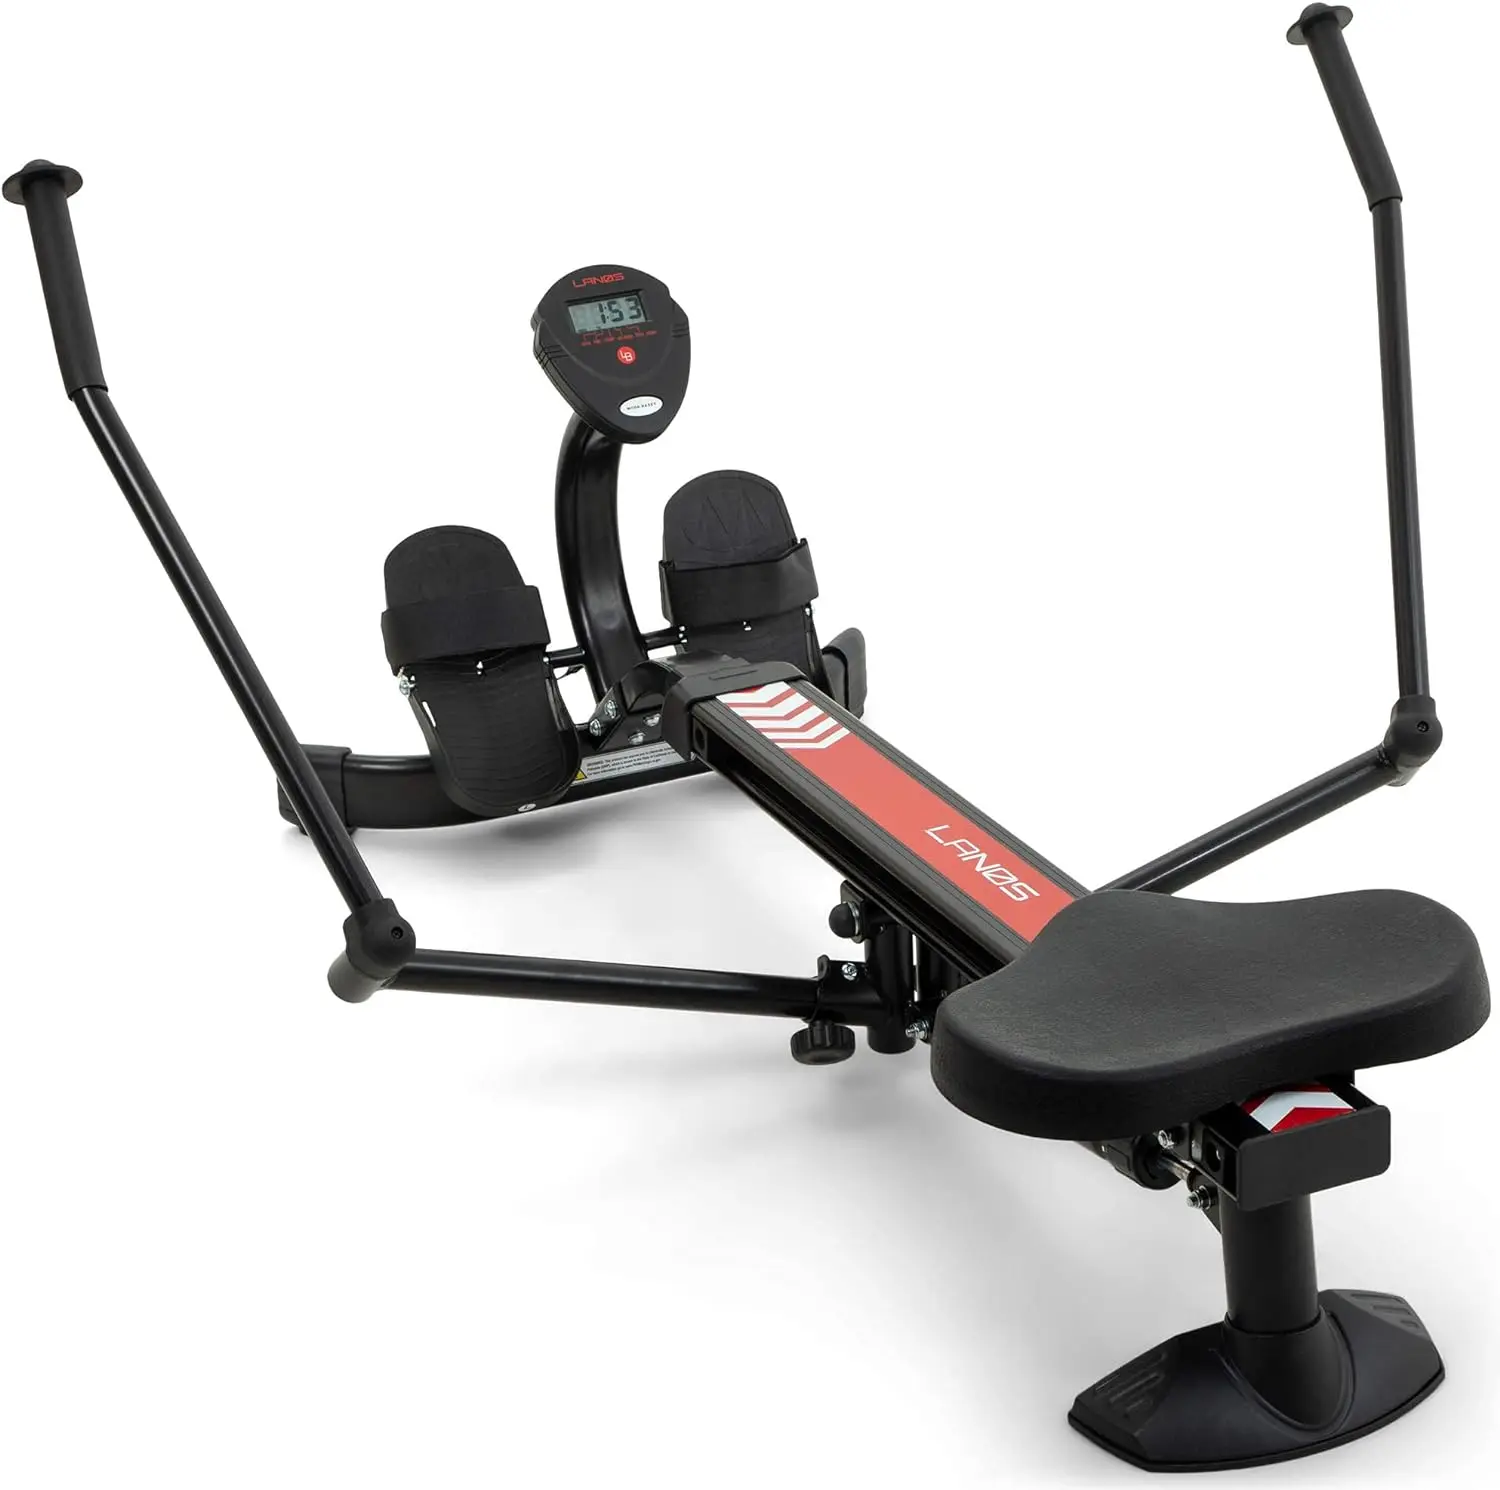 

Rowing Machine | Adjustable Resistance | Rowing Machines for Home Use | LCD Monitor | Compact for Home Workout | Tone Muscle Imp